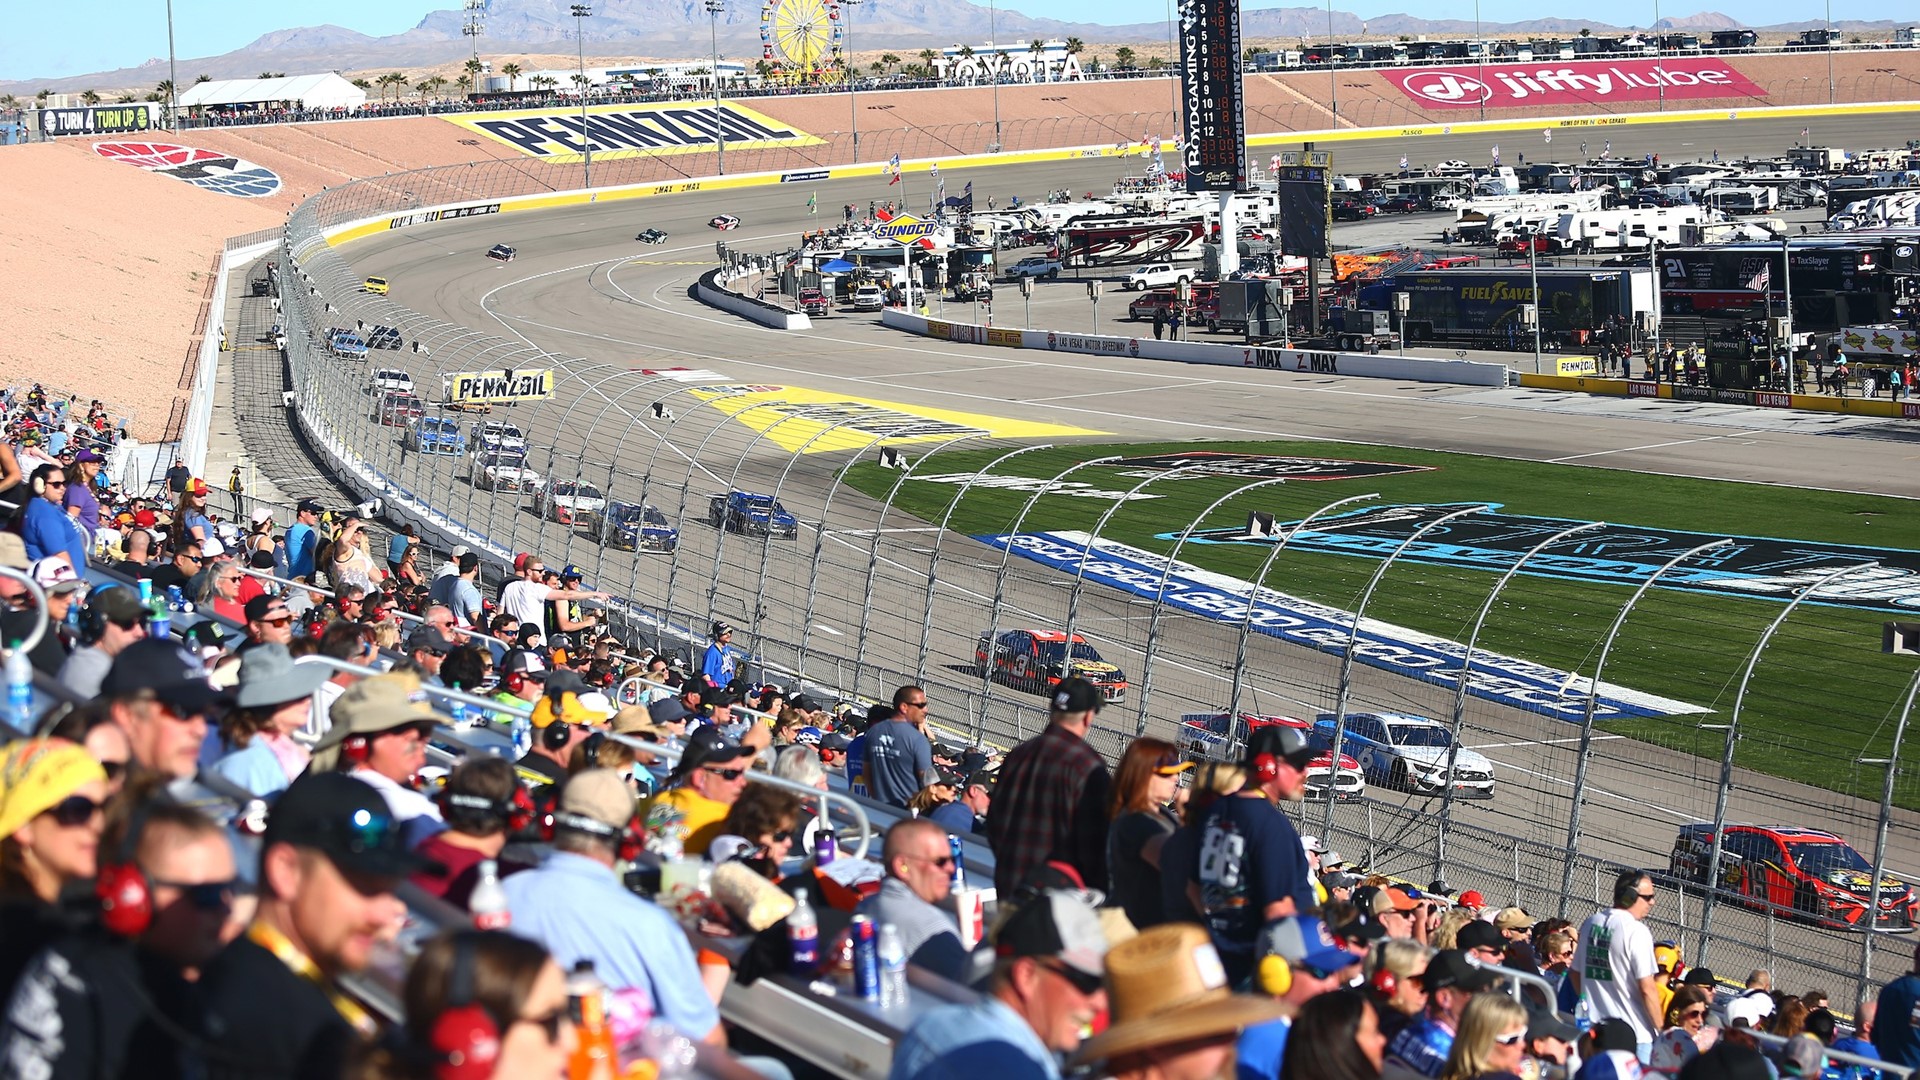 Attendees watch the NASCAR Cup Series Pennzoil 400